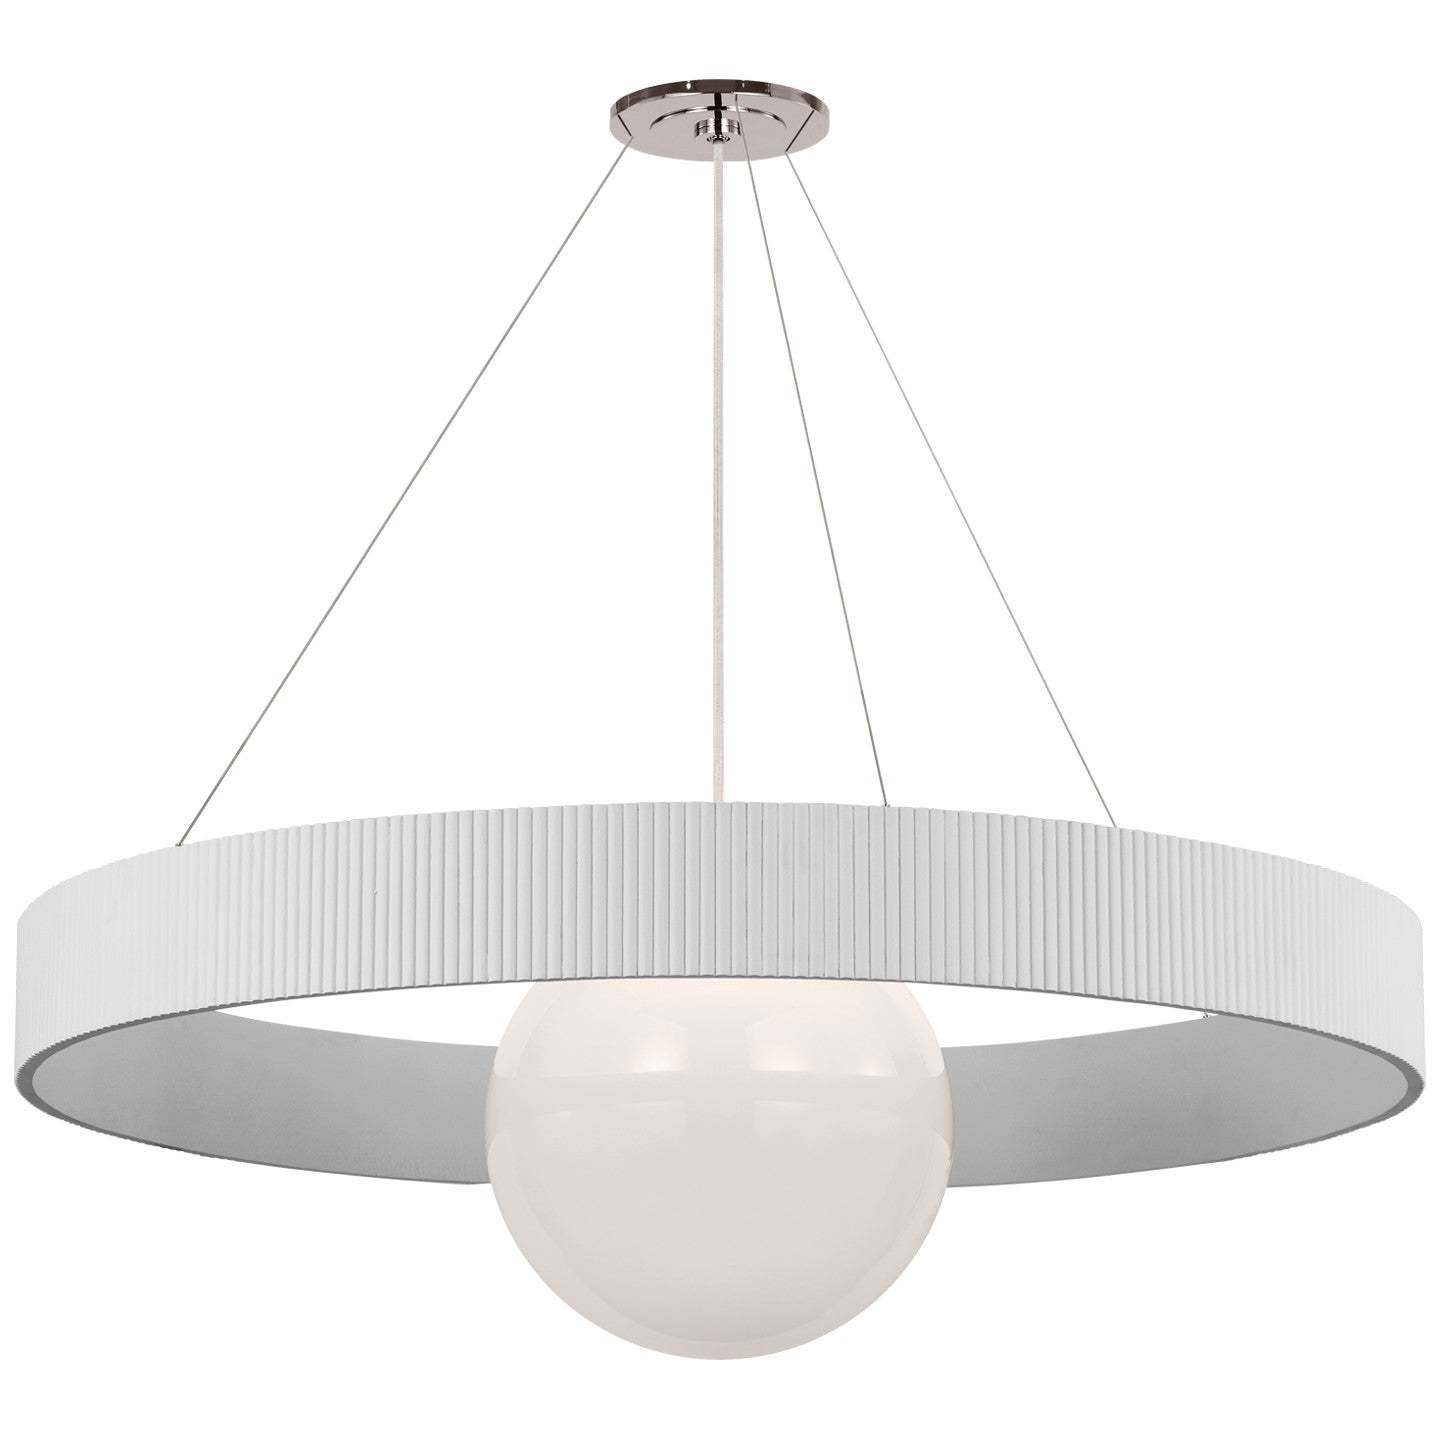 Visual Comfort Signature - WS 5002PN/WHT-WG - LED Chandelier - Arena - Polished Nickel and White Glass